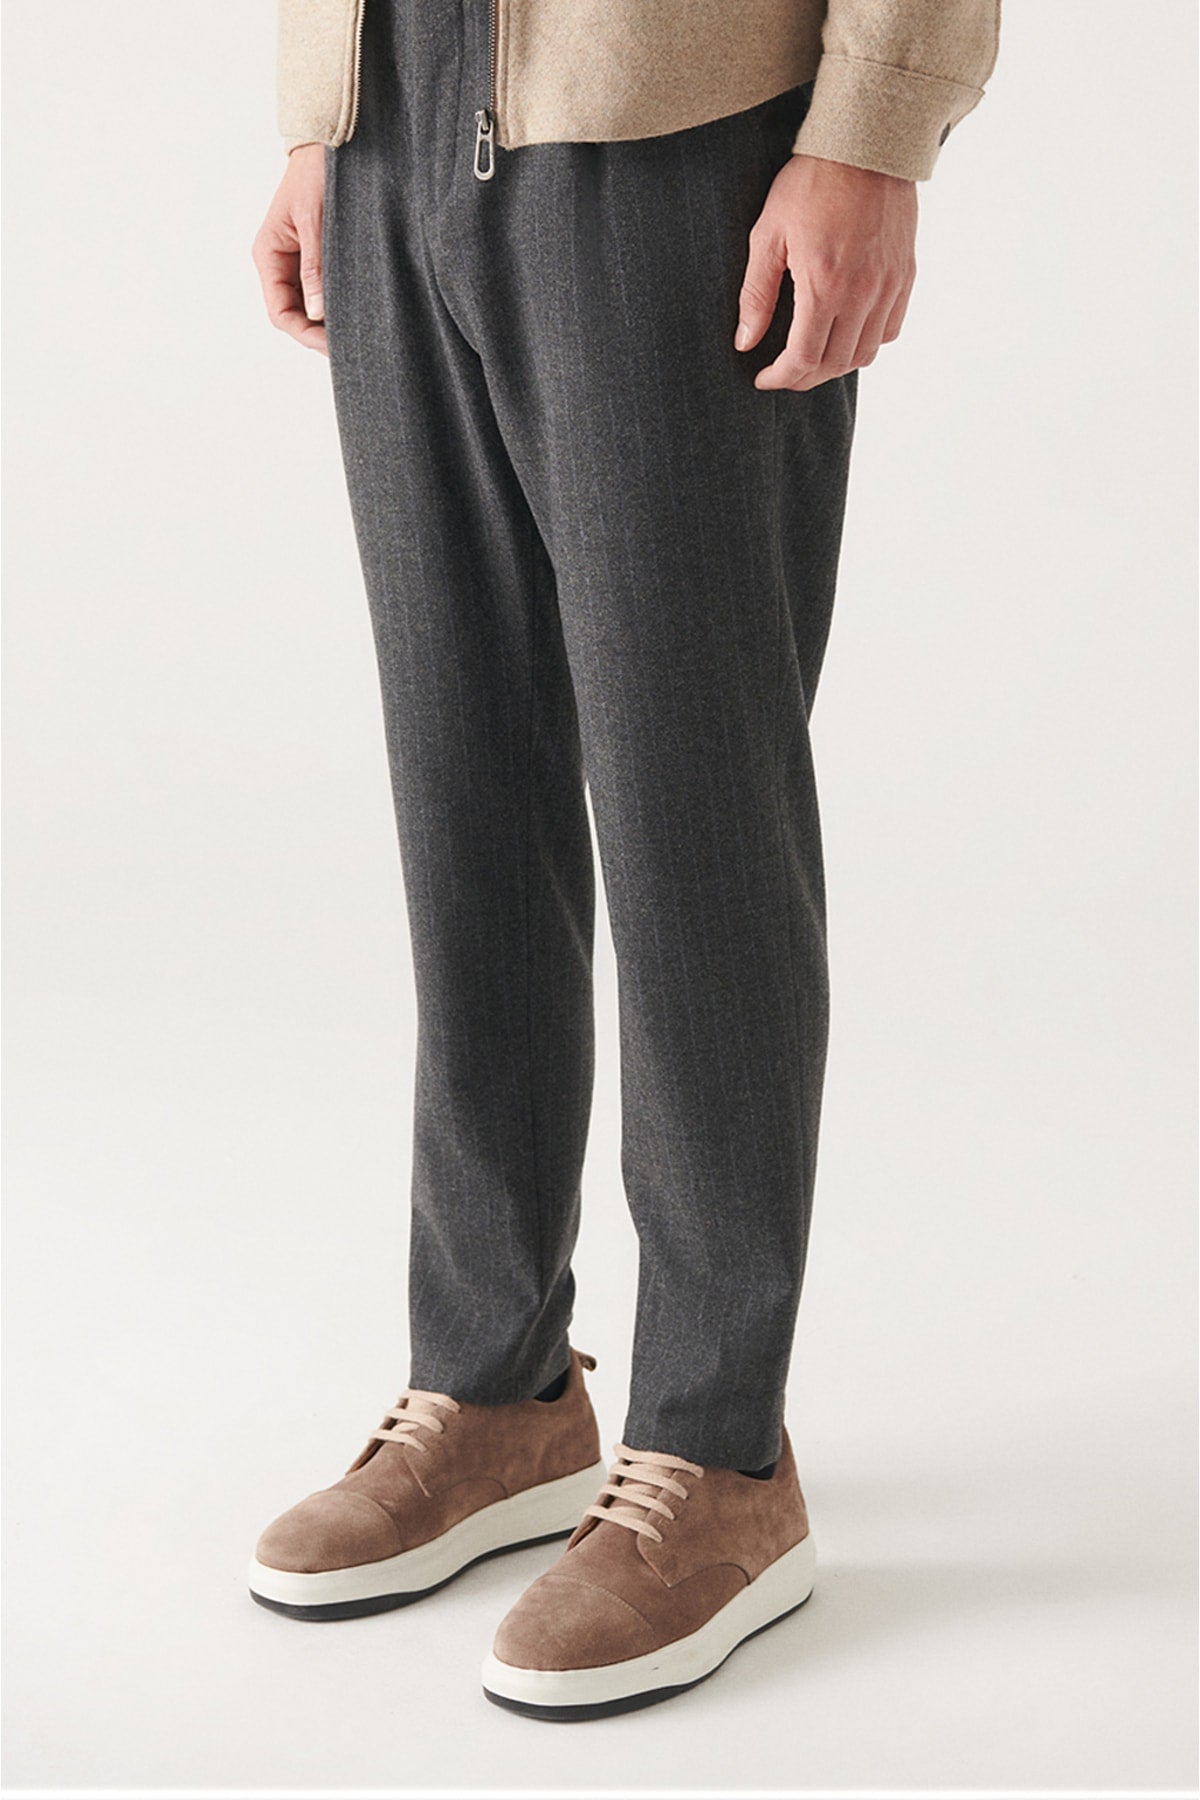 Anthracite woolen pleated striped relaxed fit suit pants